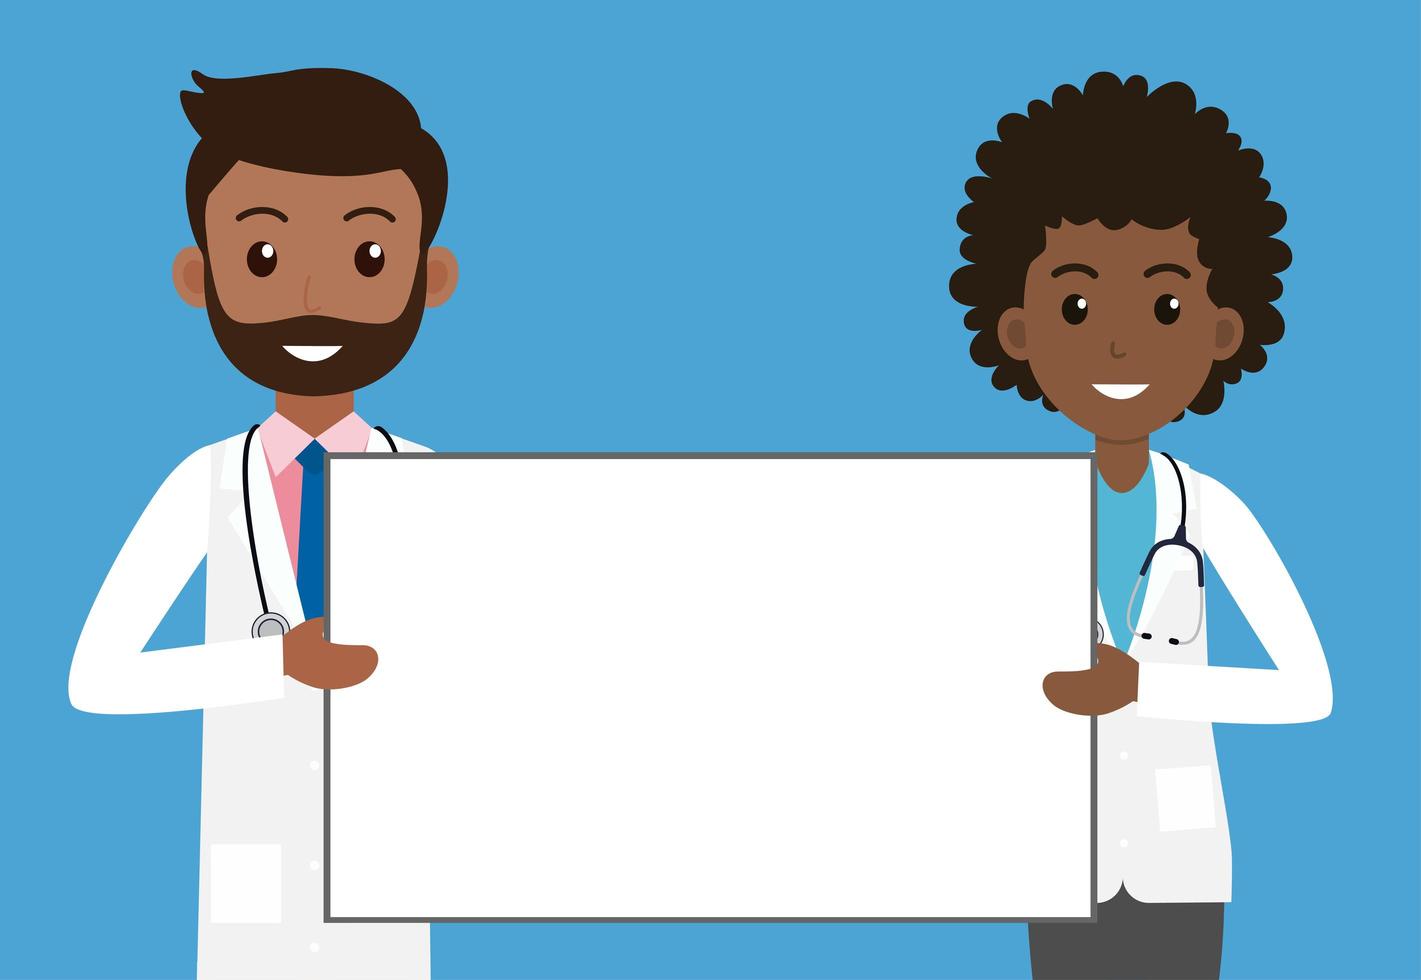 Male and Female Minority Doctors Holding Sign vector